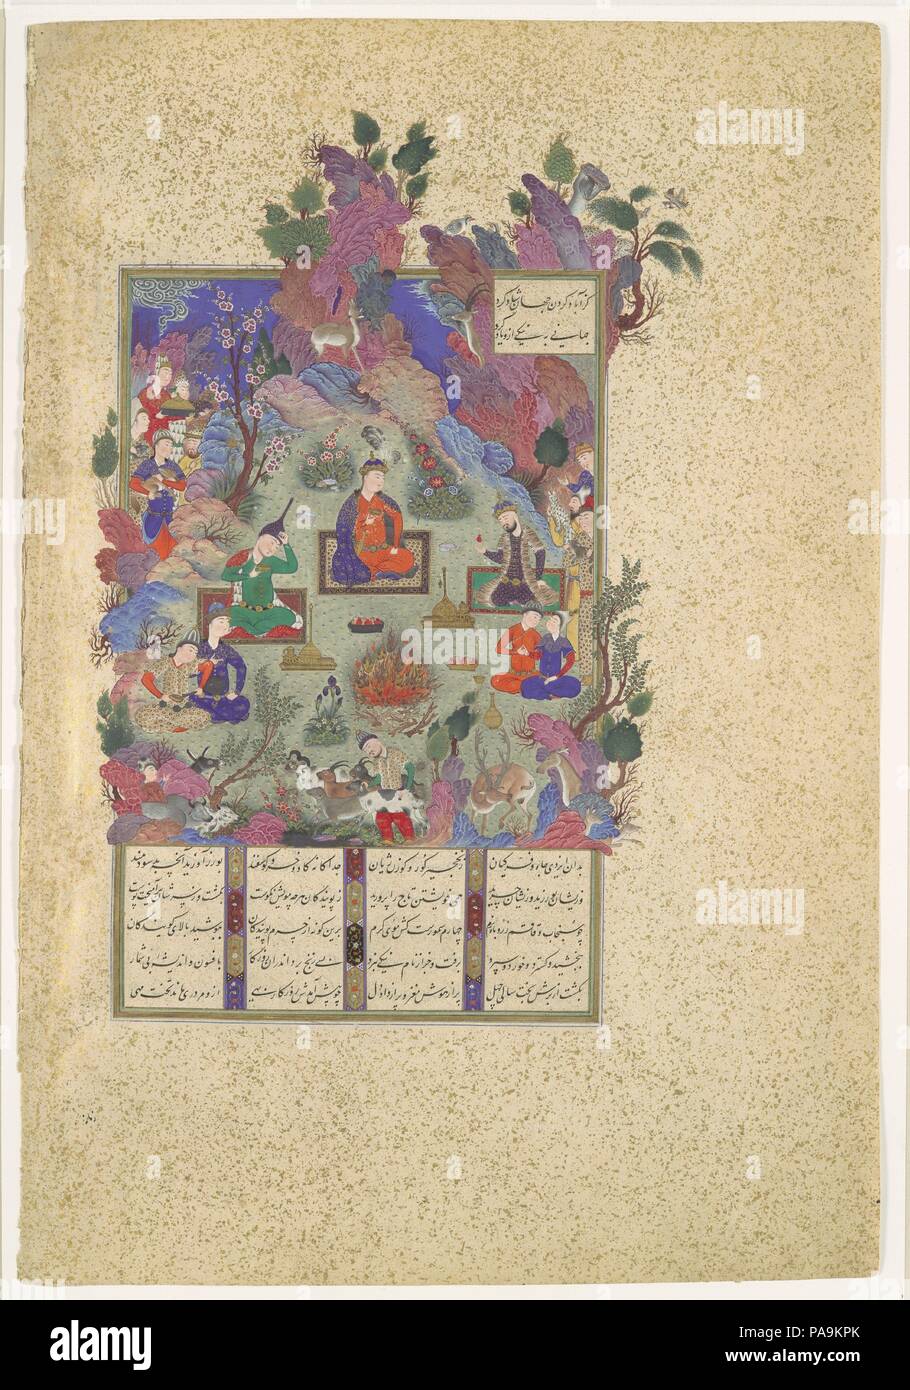 'The Feast of Sada', Folio 22v from the Shahnama (Book of Kings) of Shah Tahmasp. Artist: Painting attributed to Sultan Muhammad (active first half 16th century). Author: Abu'l Qasim Firdausi (935-1020). Dimensions: Painting: H. 9 1/2 in. (24.1 cm)   W. 9 1/16 in. (23 cm)  Page: H. 18 1/2 in. (47 cm)  W.12 1/2 in. (31.8 cm)  Mat: H. 22 in. (55.9 cm)  W. 16 in. (40.6 cm). Date: ca. 1525.  In the reign of Hushang, grandson of Gayumars, the world came to understand the usefulness of minerals and the arts of smithery, agriculture, and irrigation. One day, Hushang spied a dragon lurking behind the  Stock Photo